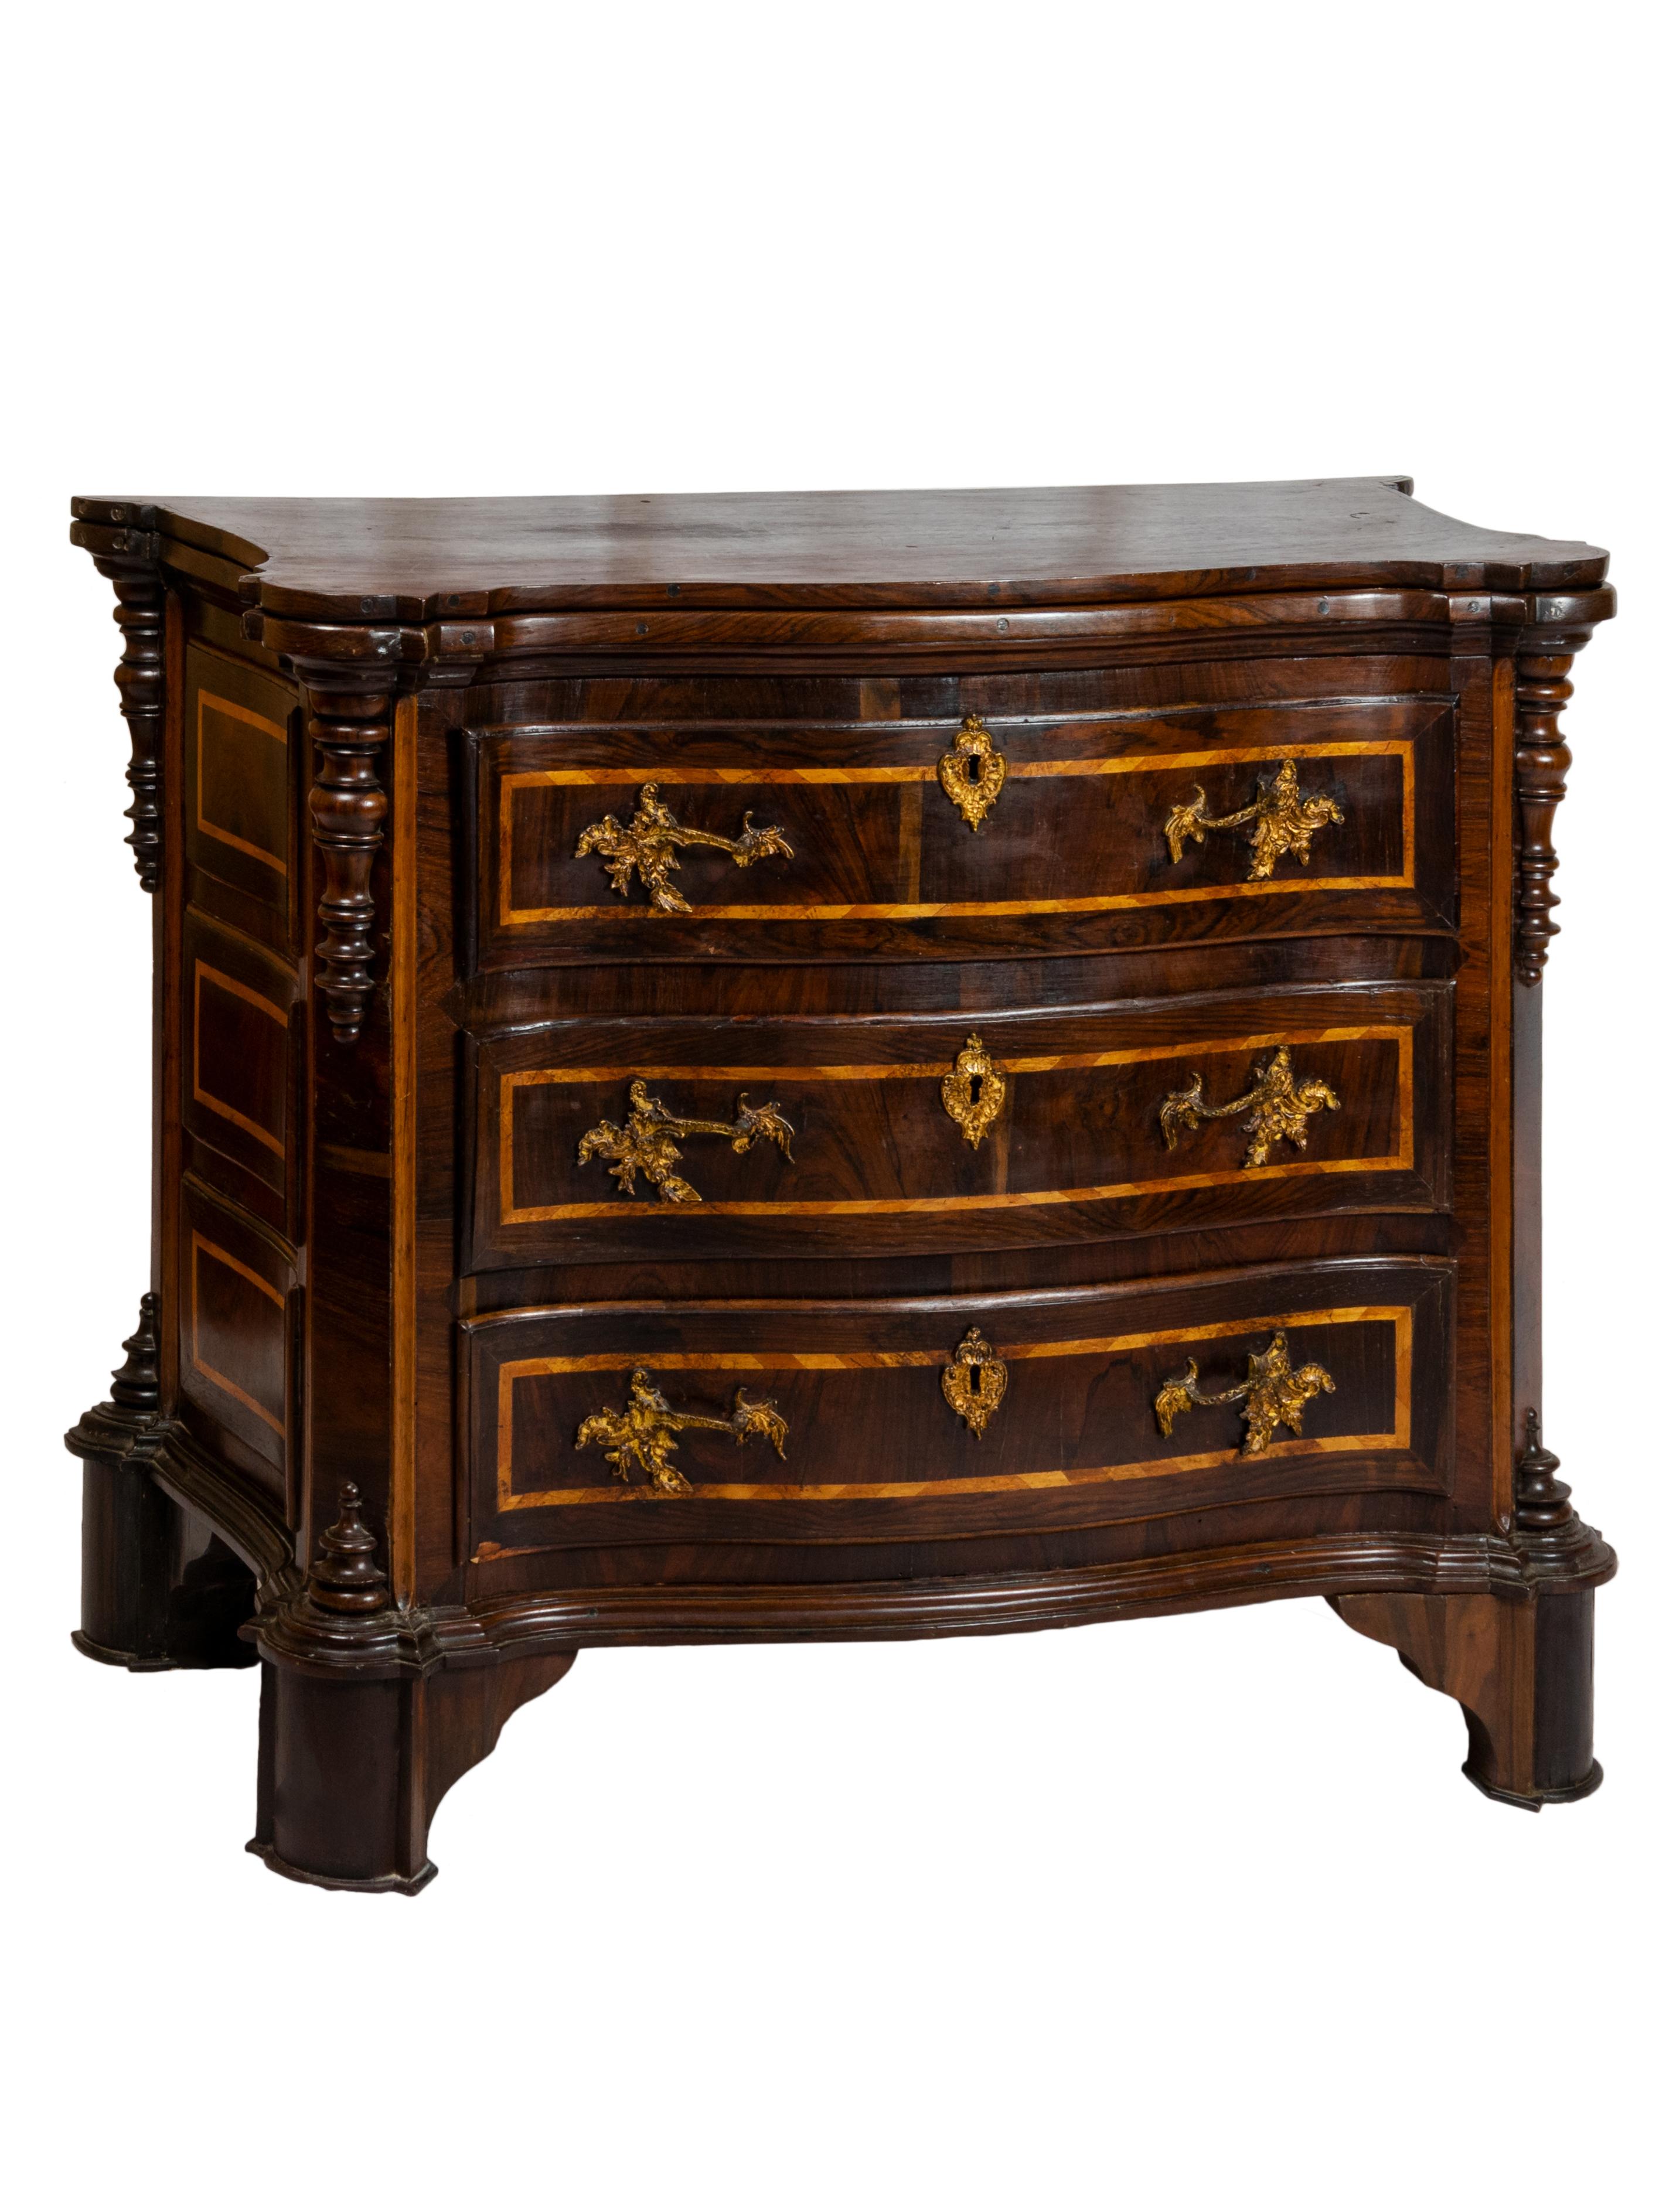 Portuguese Baroque Drop Leaf Table Chest of Drawers, 17th Century For Sale